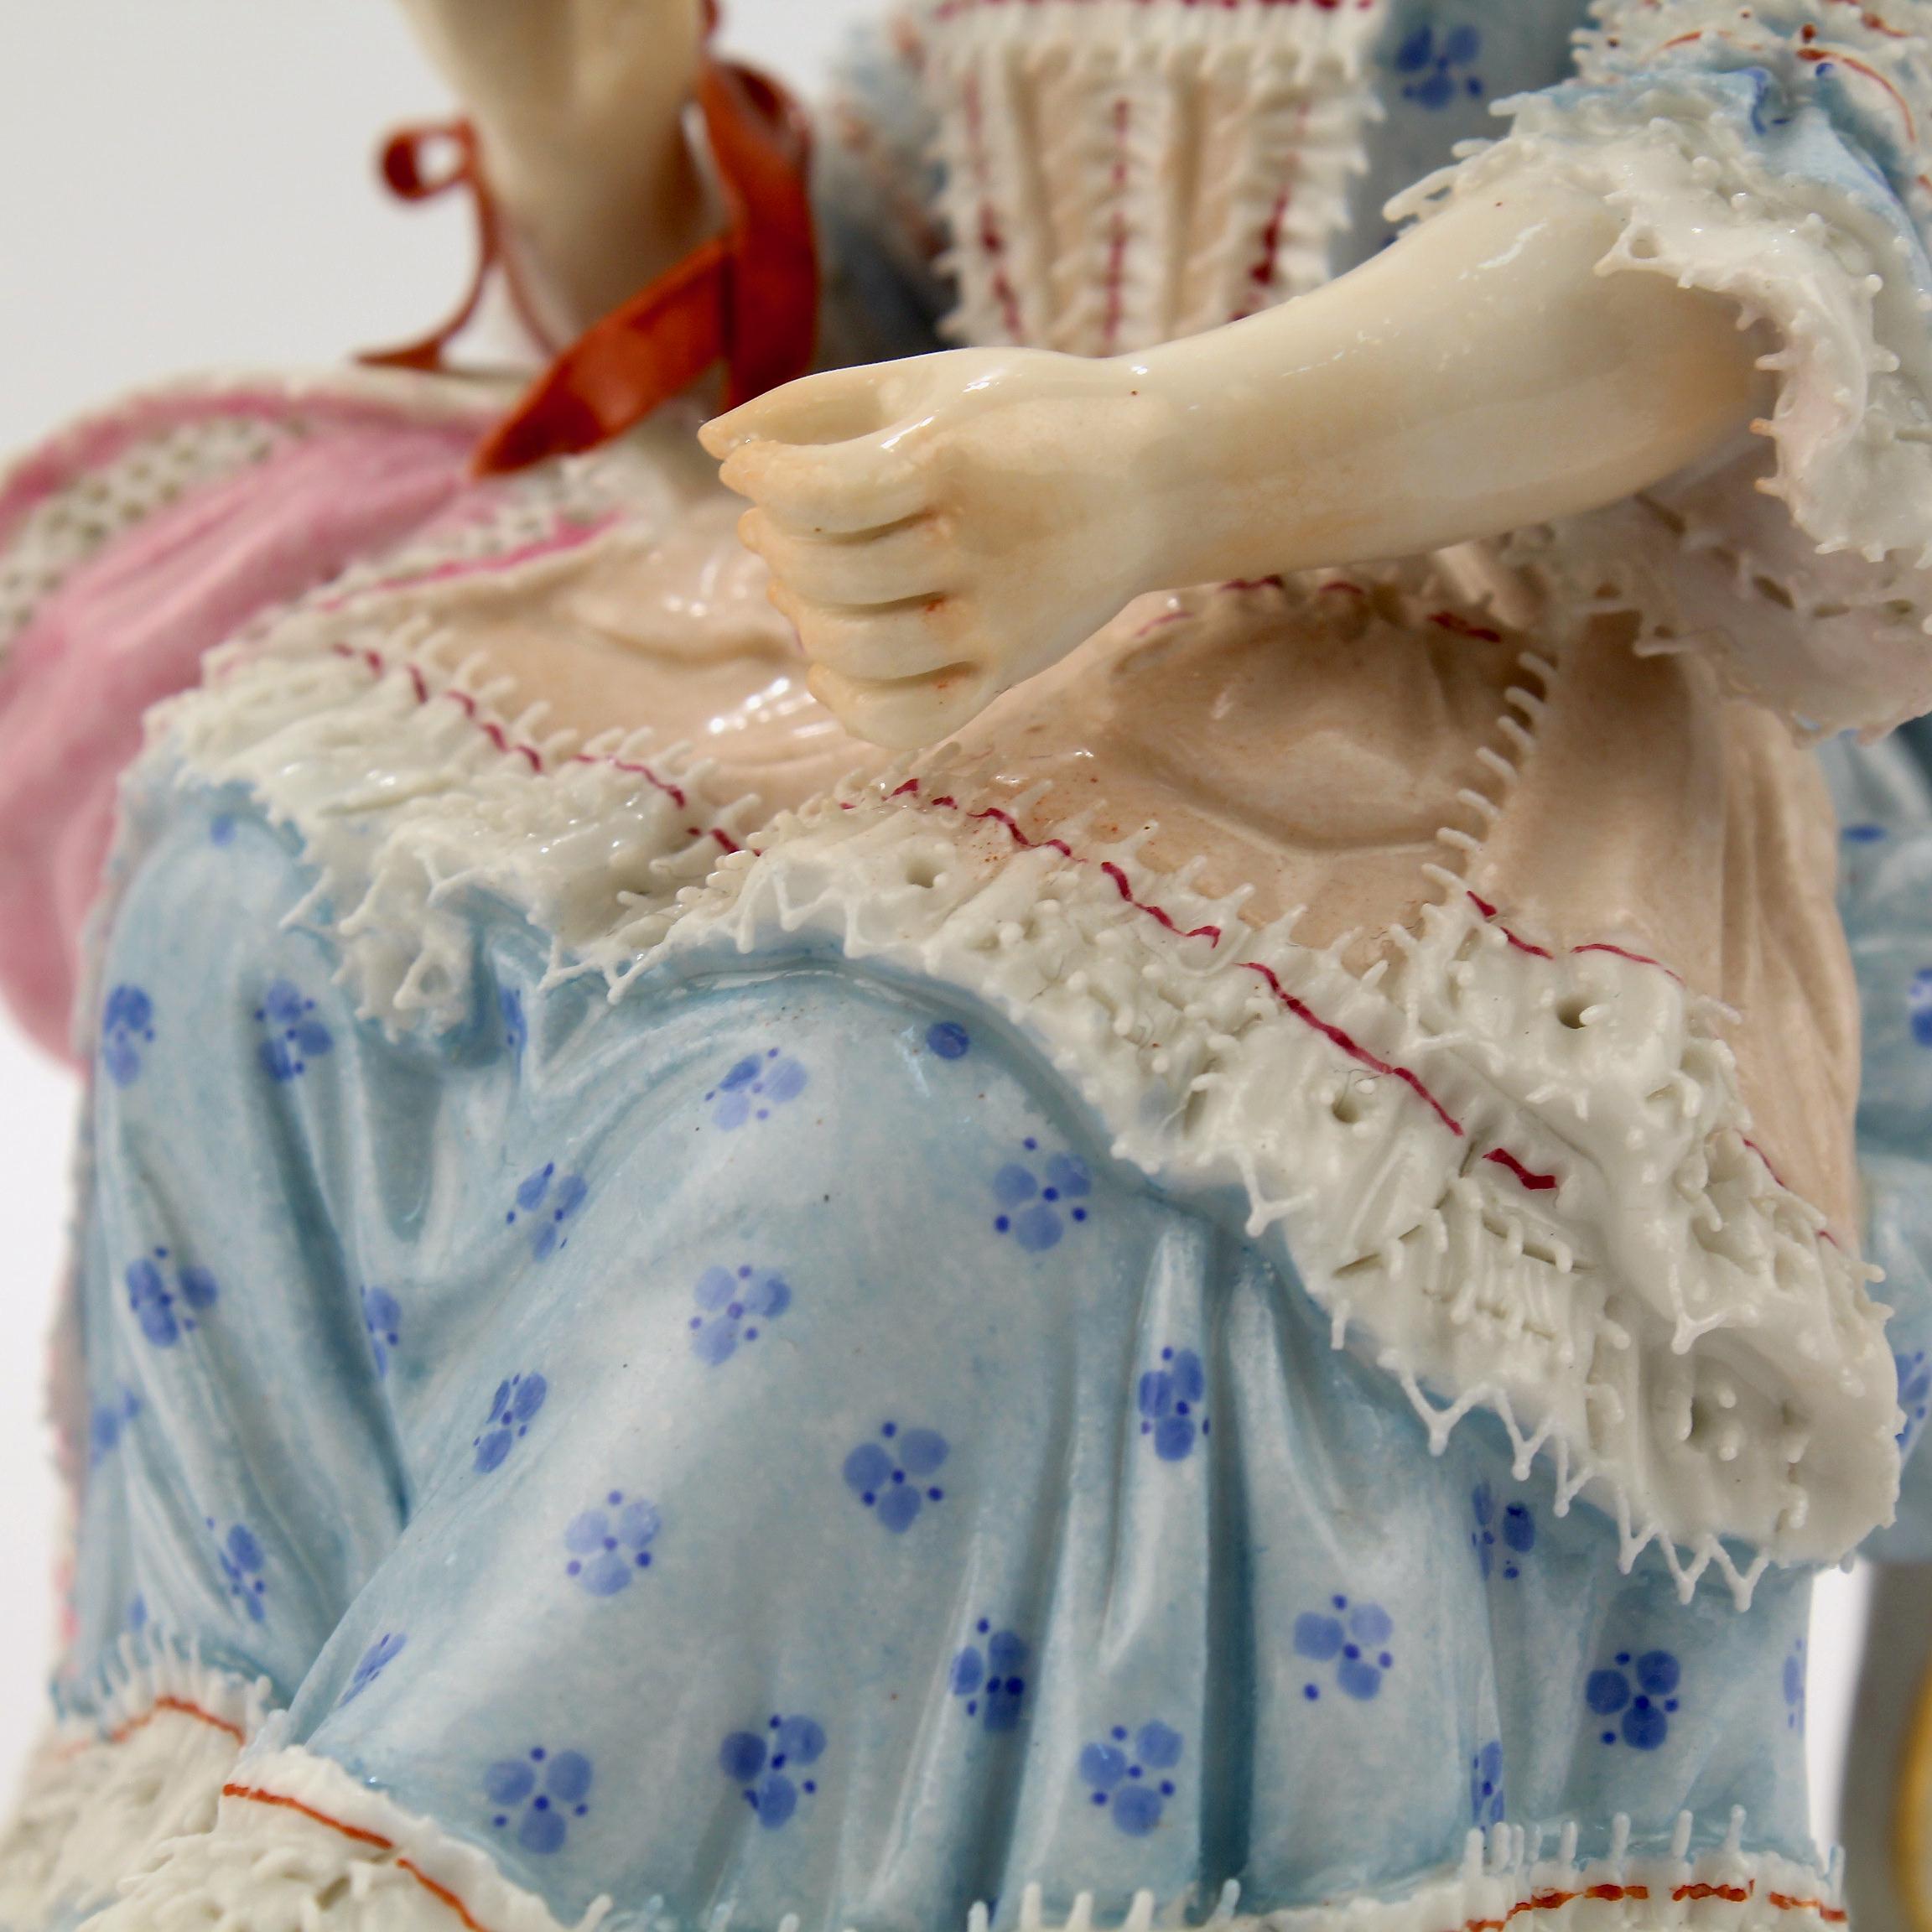 Antique Meissen Porcelain Figurine of a Girl with a Thread Winder Model No. C 28 4